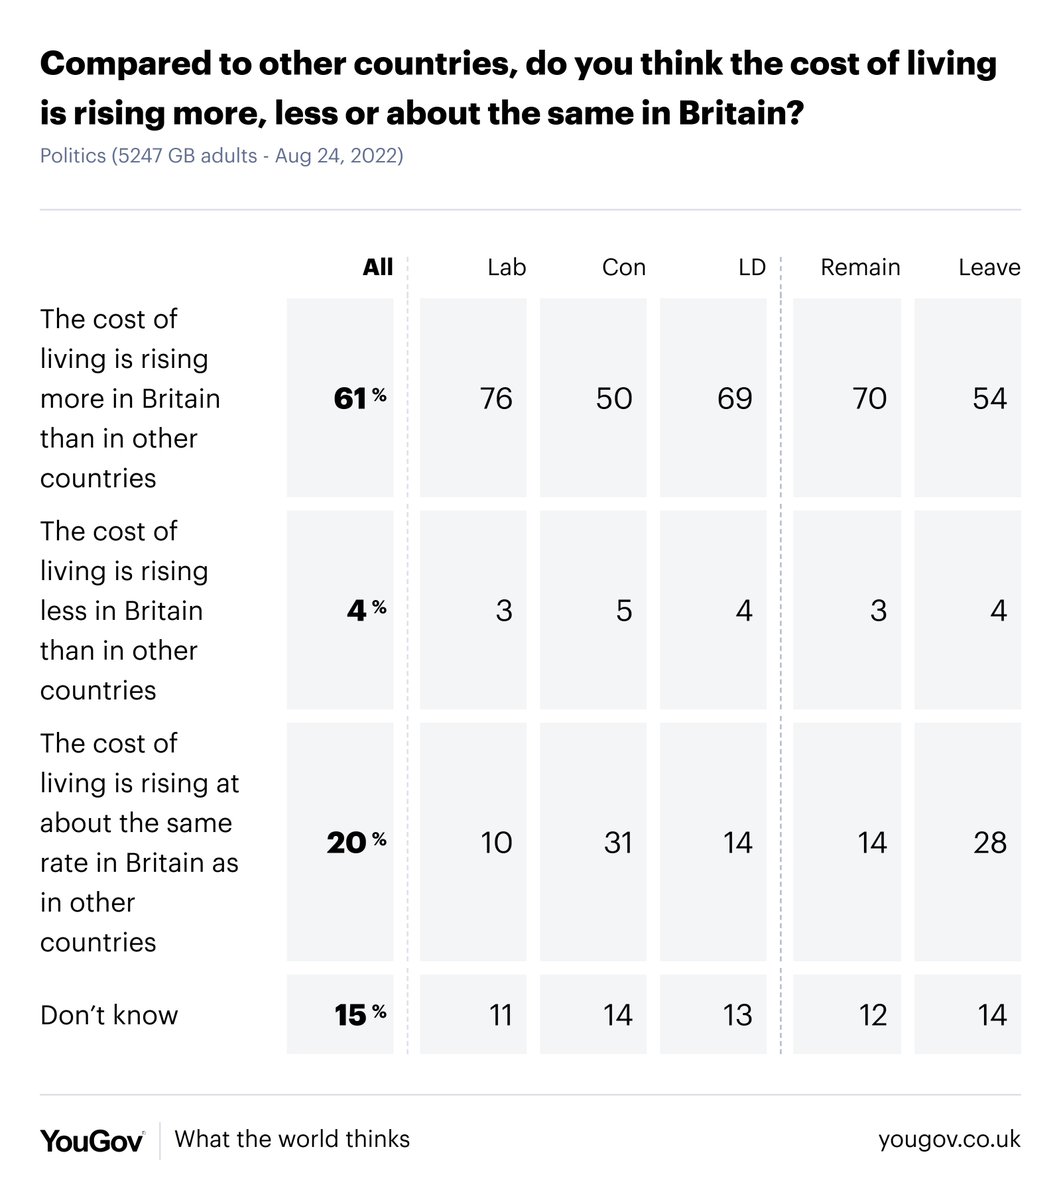 Do you think the cost of living in Britain is rising... More than in other countries: 61% About the same as in other countries: 20% Less than in other countries: 4% yougov.co.uk/topics/politic…